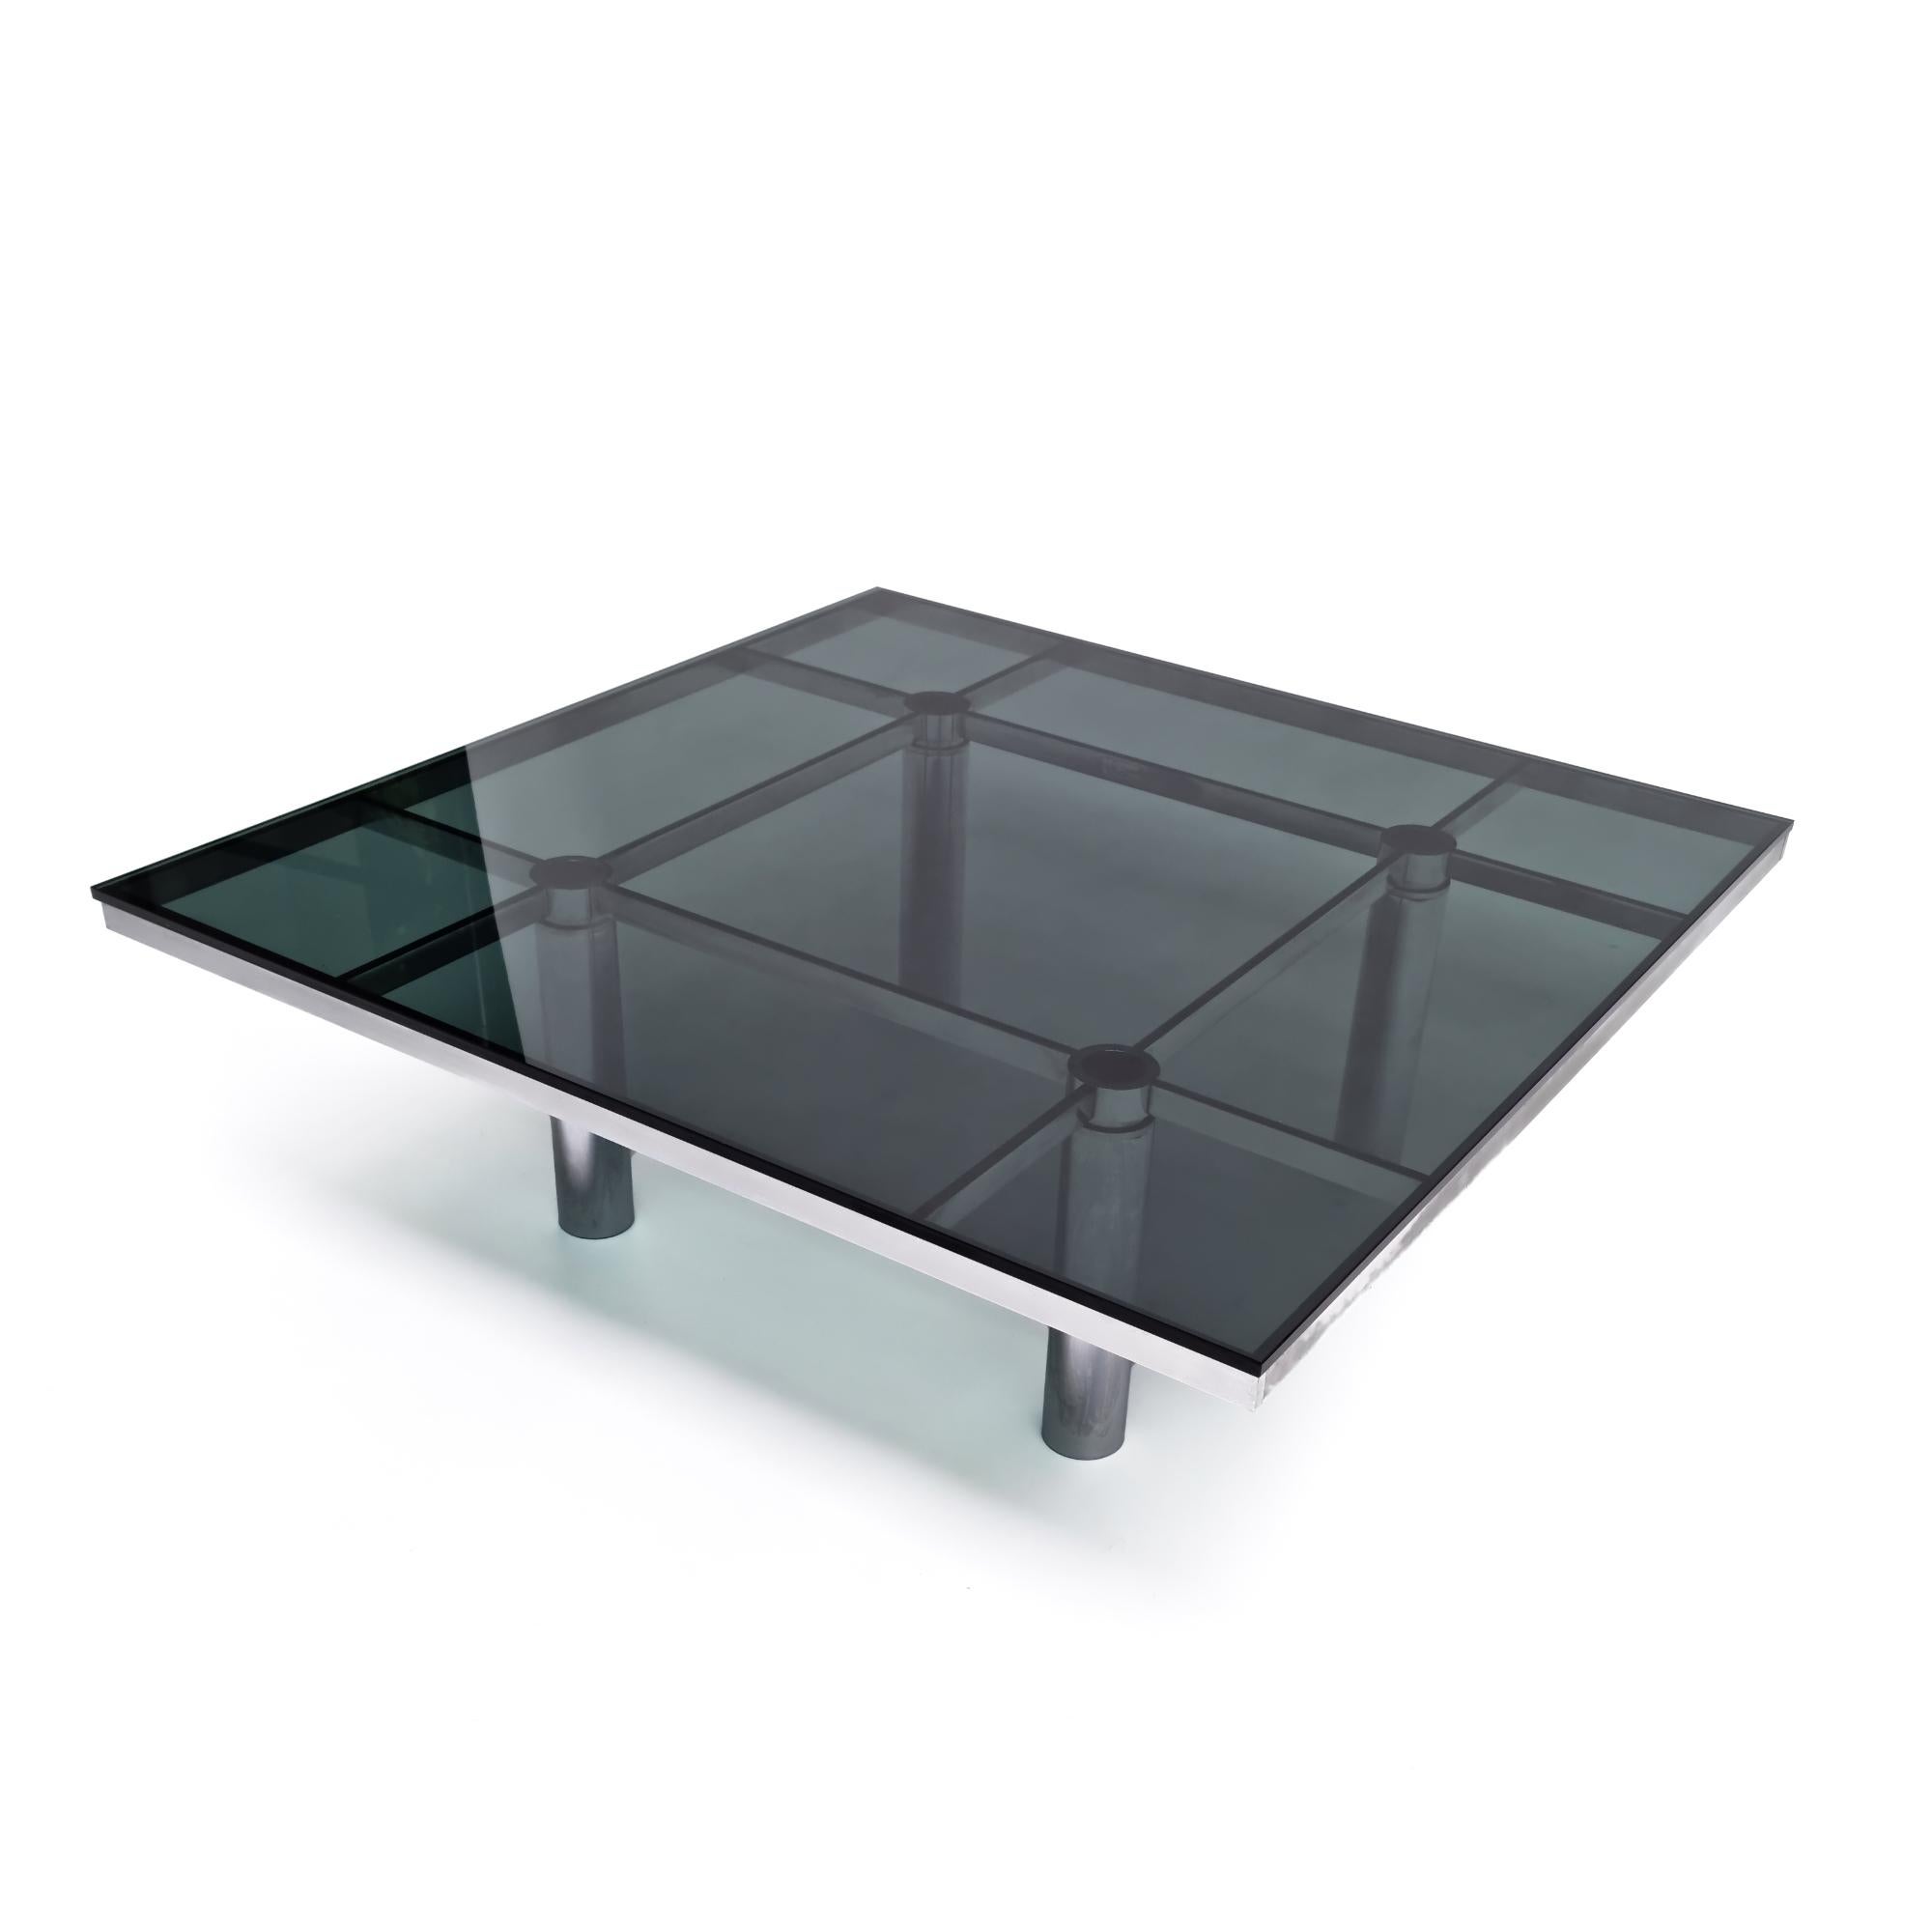 Coffee table model ‘André’ of 1969 created by Tobia Scarpa and manufactured by Knoll International. Chromed steel structure, adjustable legs, smoked glass. Good condition!